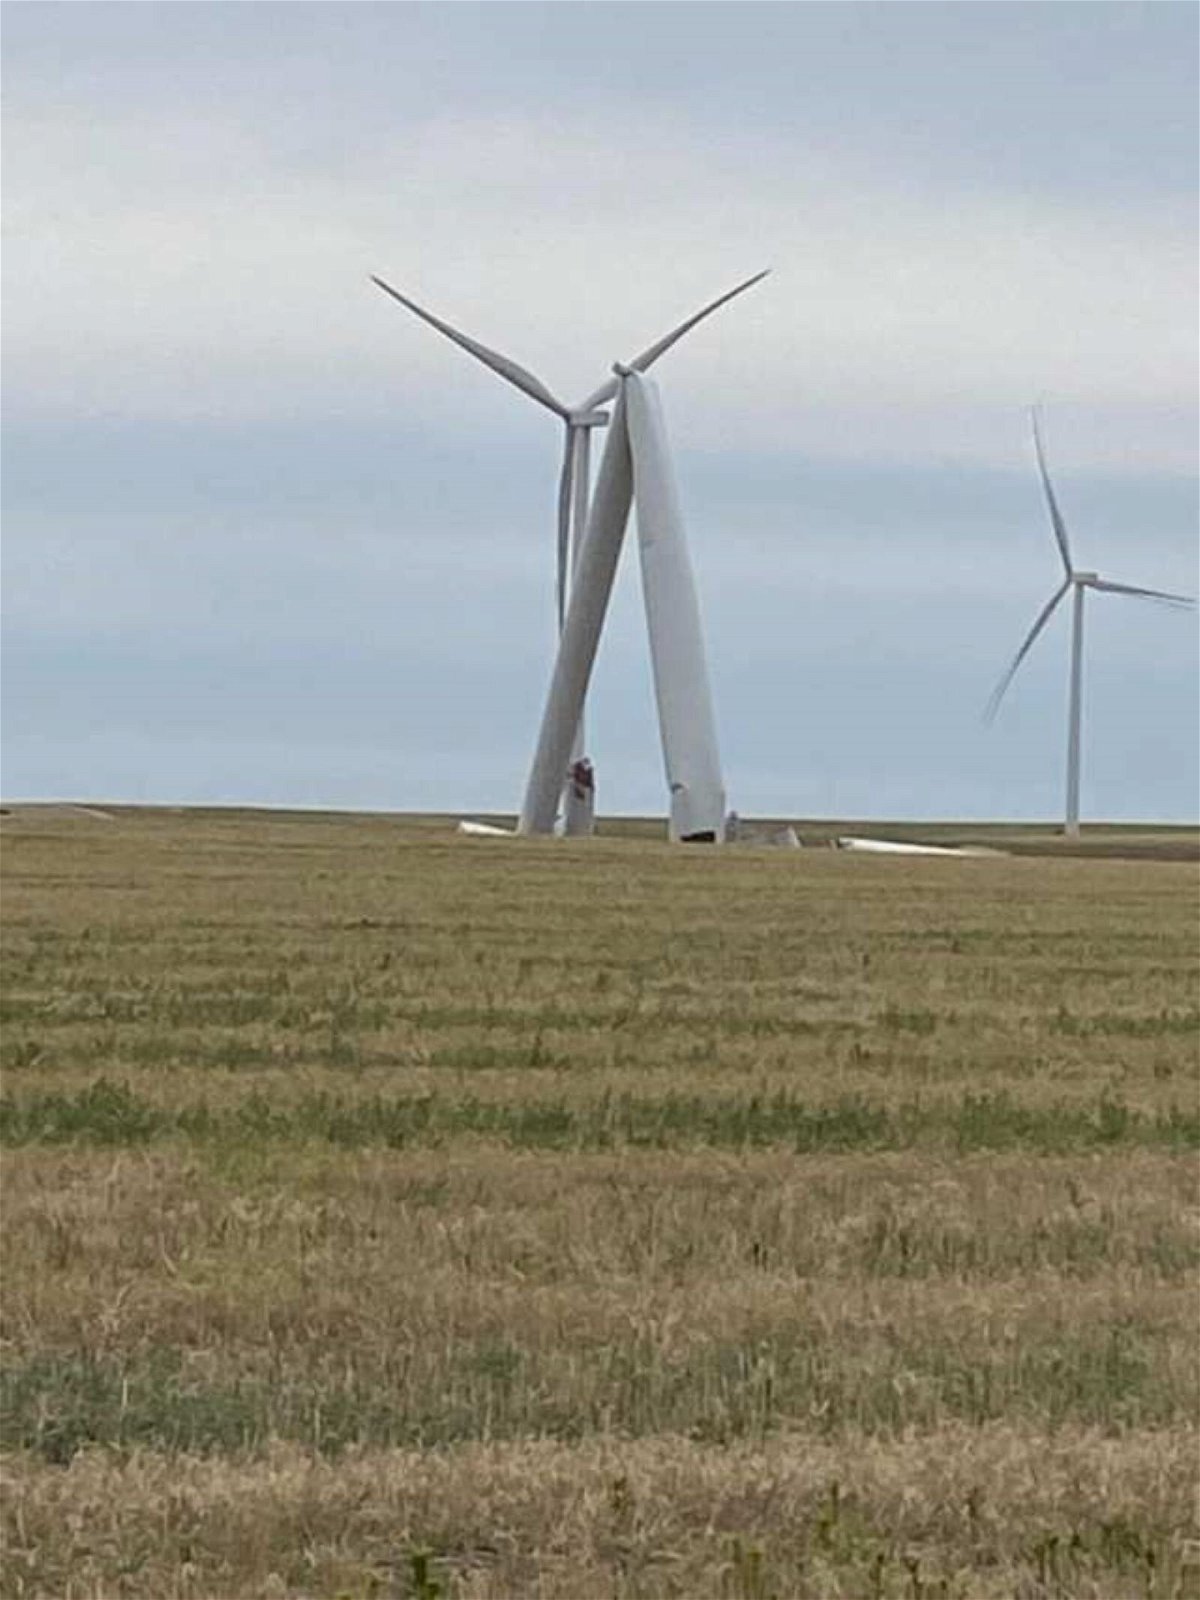 <i>Fleming Volunteer FD/KCNC</i><br/>Fleming Volunteer Fire Department says they received a call Wednesday of blades falling off one turbine. When crews got on scene they found an entire tower had snapped in half and collapsed.